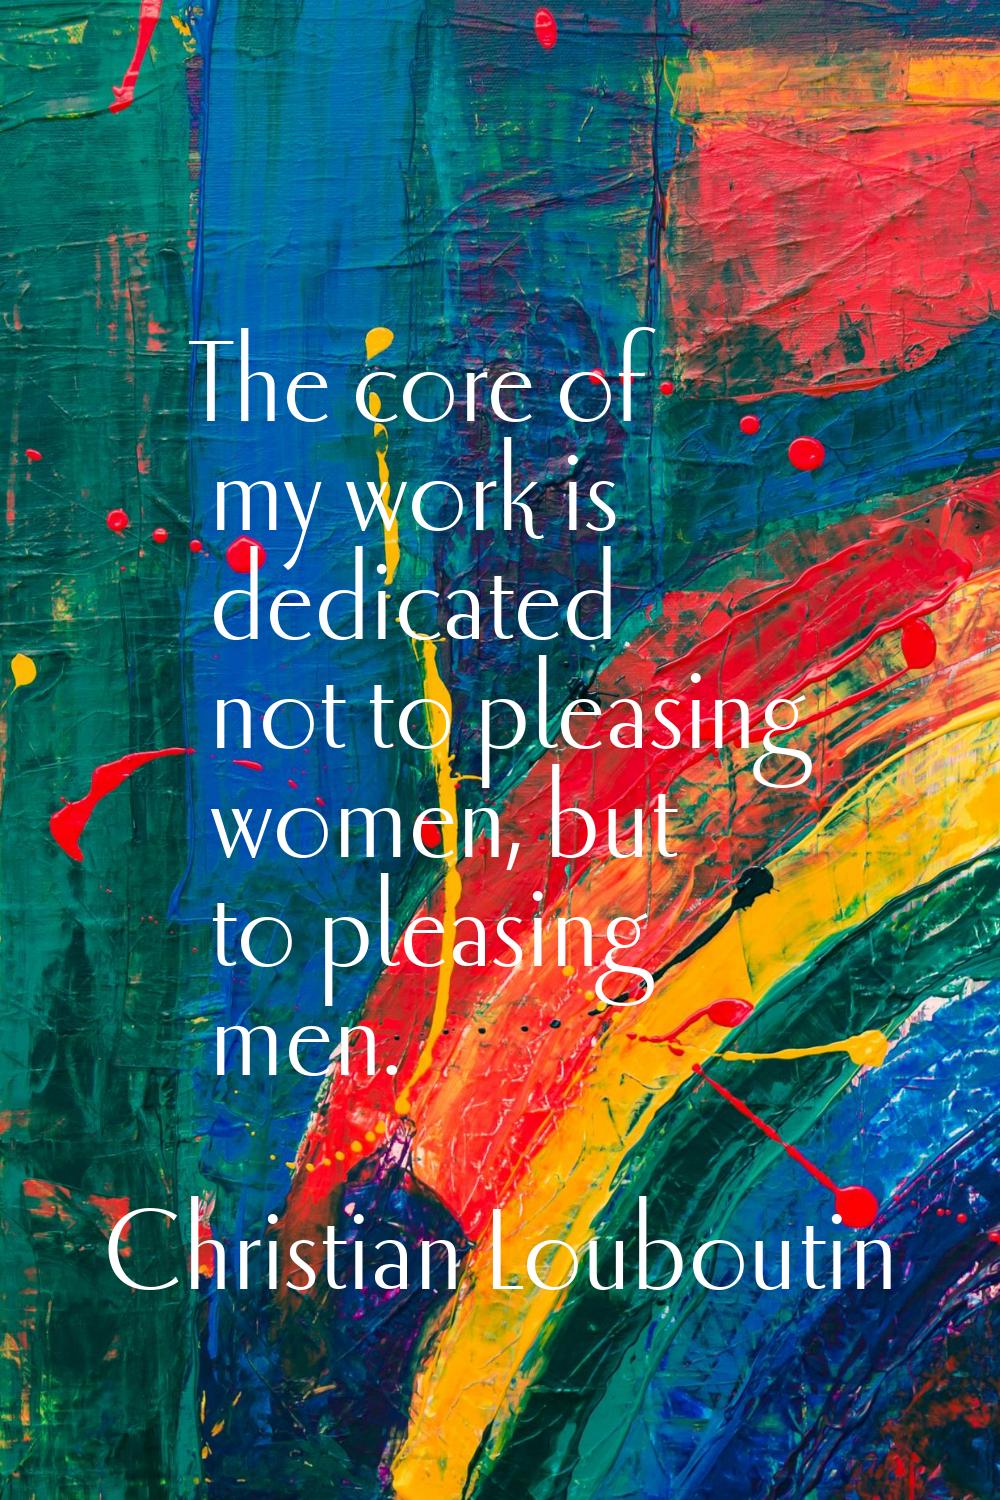 The core of my work is dedicated not to pleasing women, but to pleasing men.